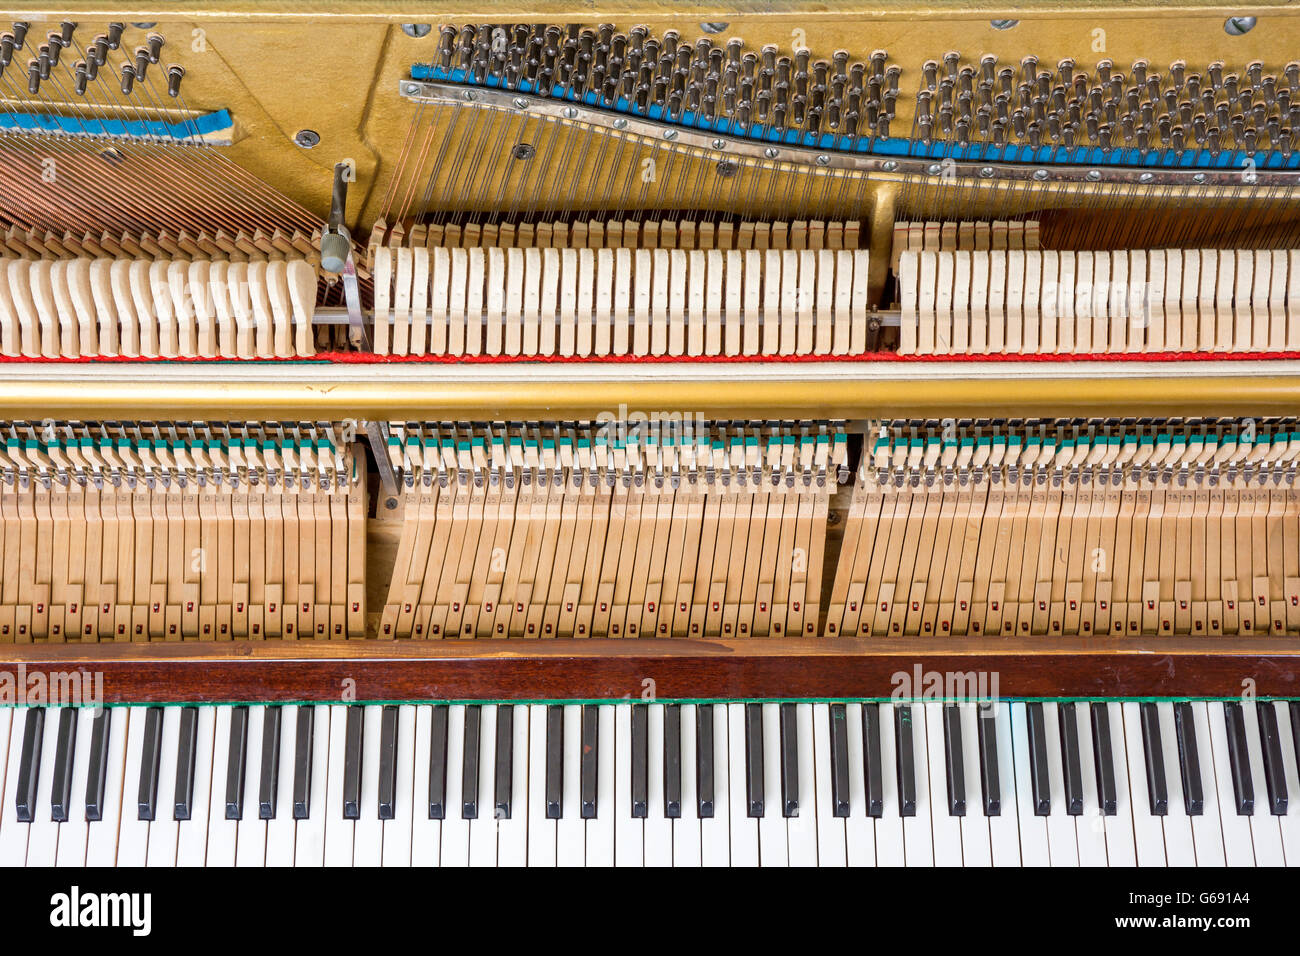 Keyboard and mechanics details of an upright piano Stock Photo